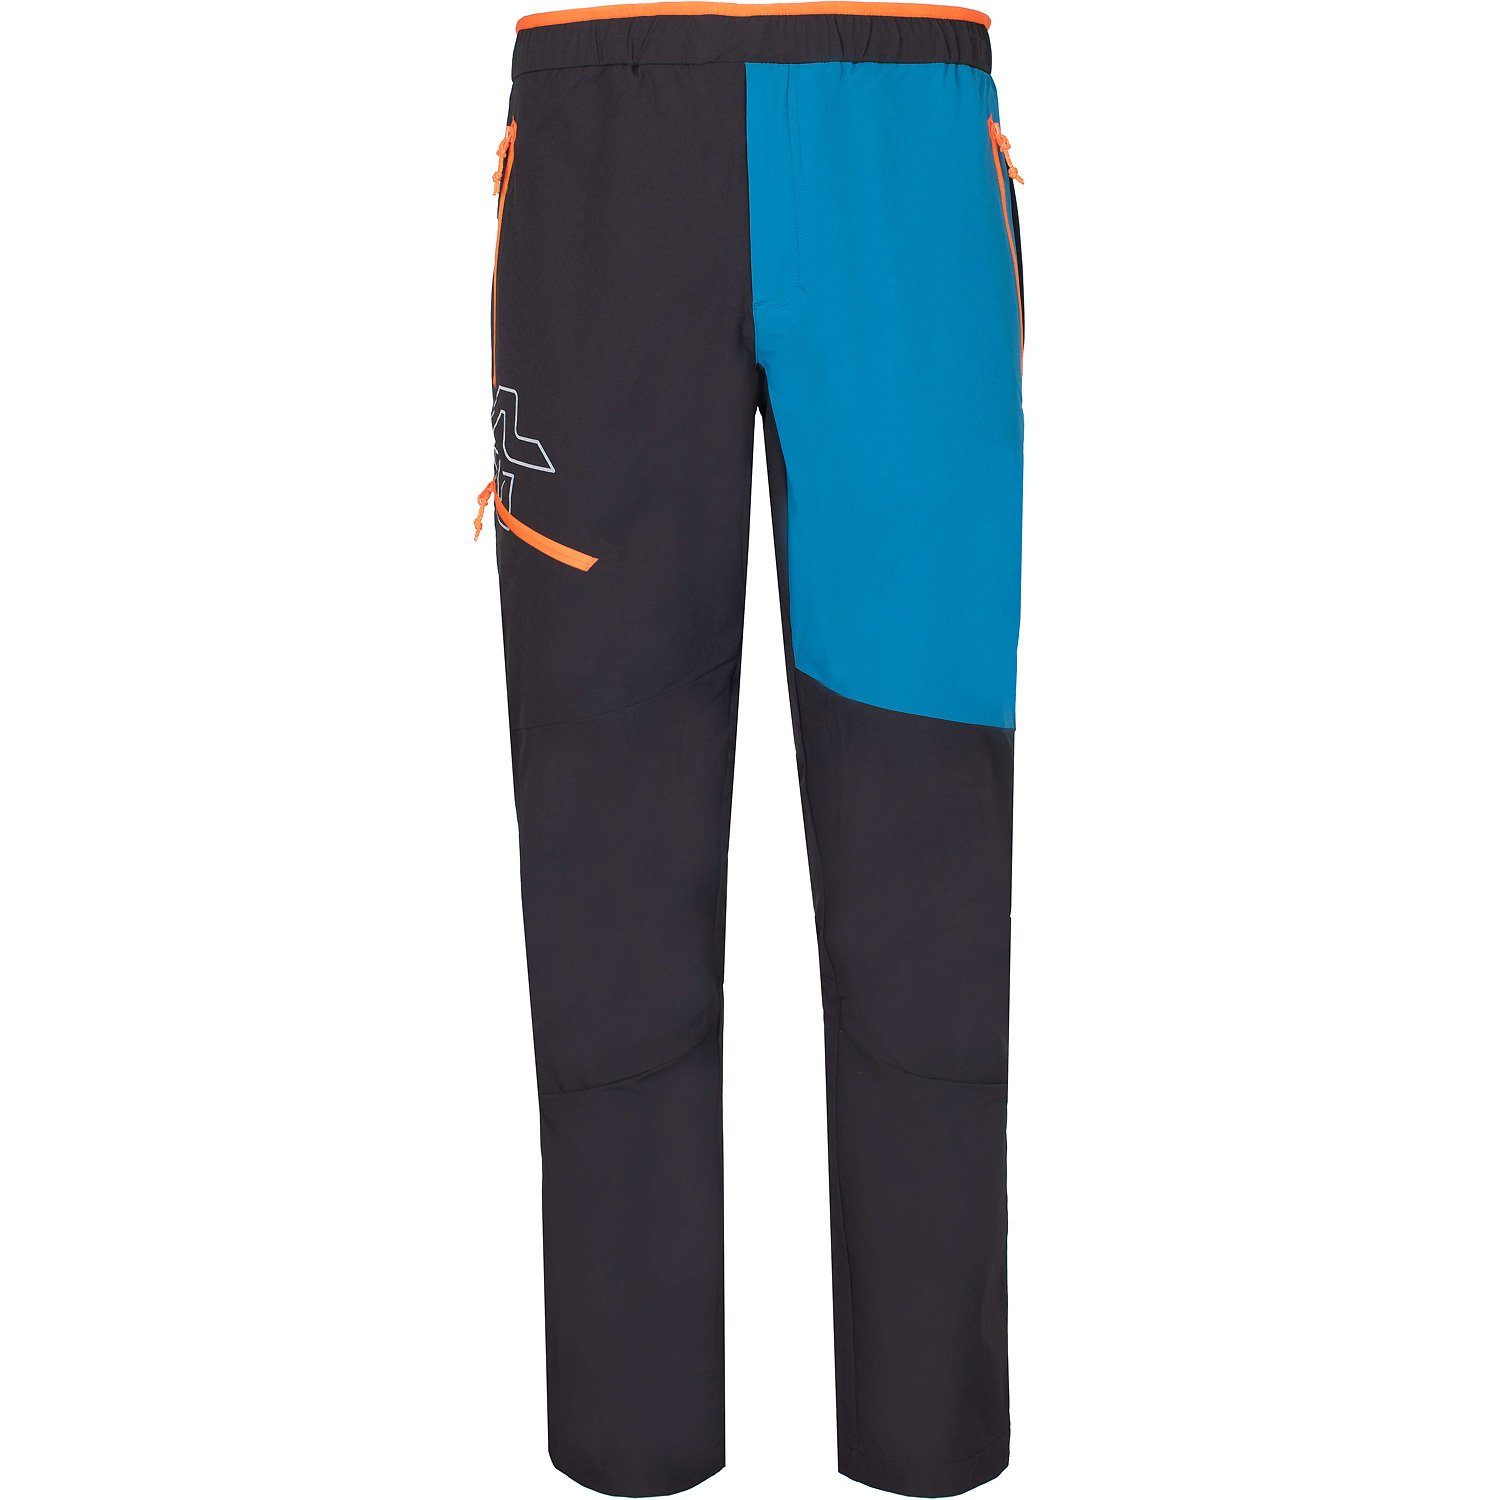 ROCK EXPERIENCE Funktionshose Space 2.0 Flake Outdoorhose